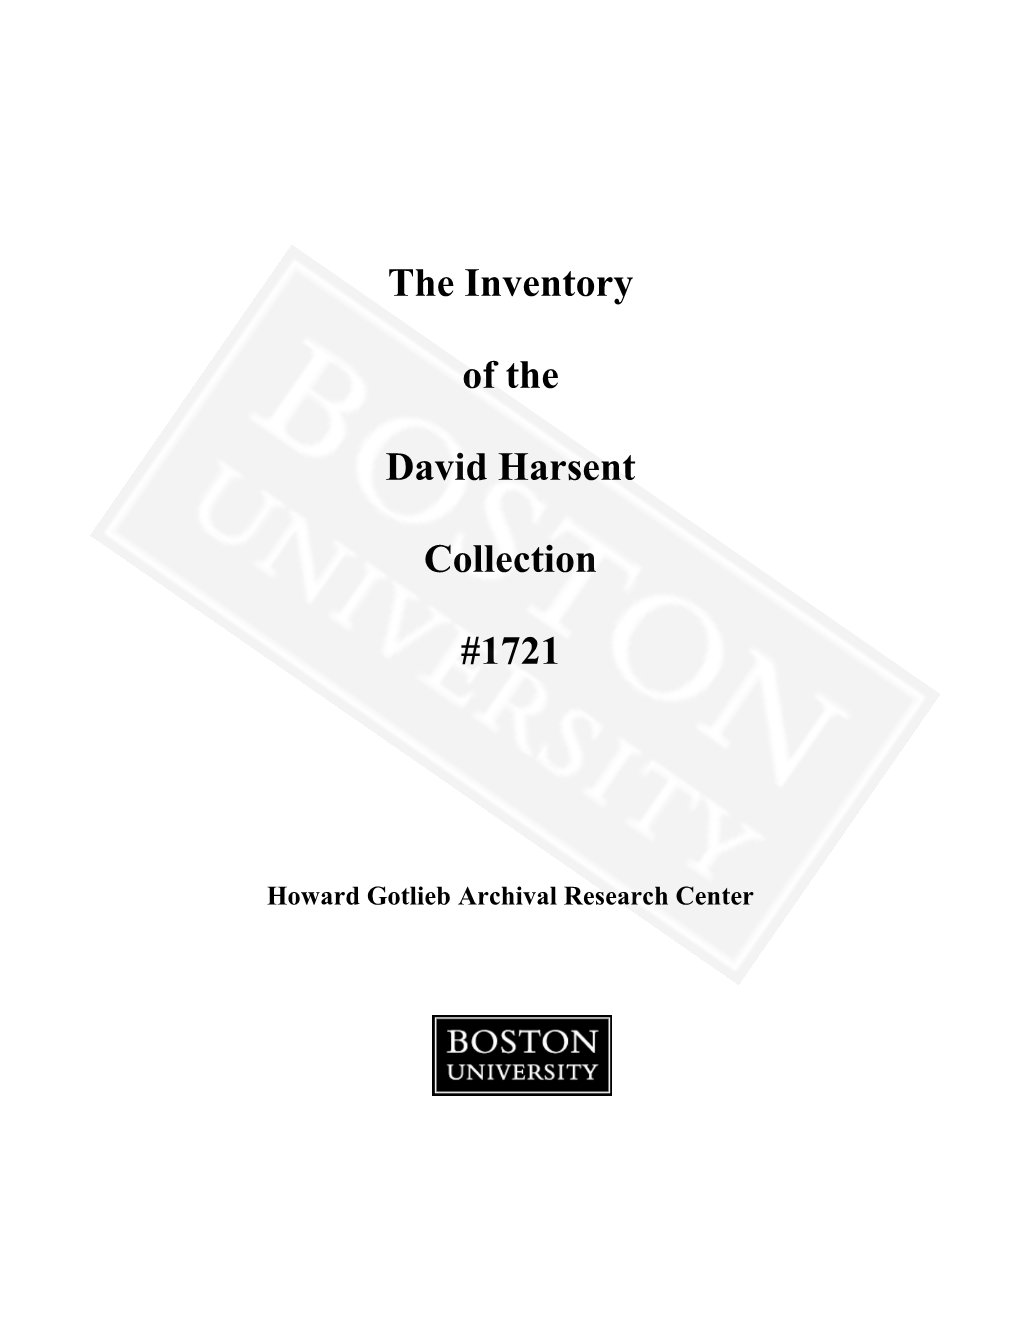 The Inventory of the David Harsent Collection #1721